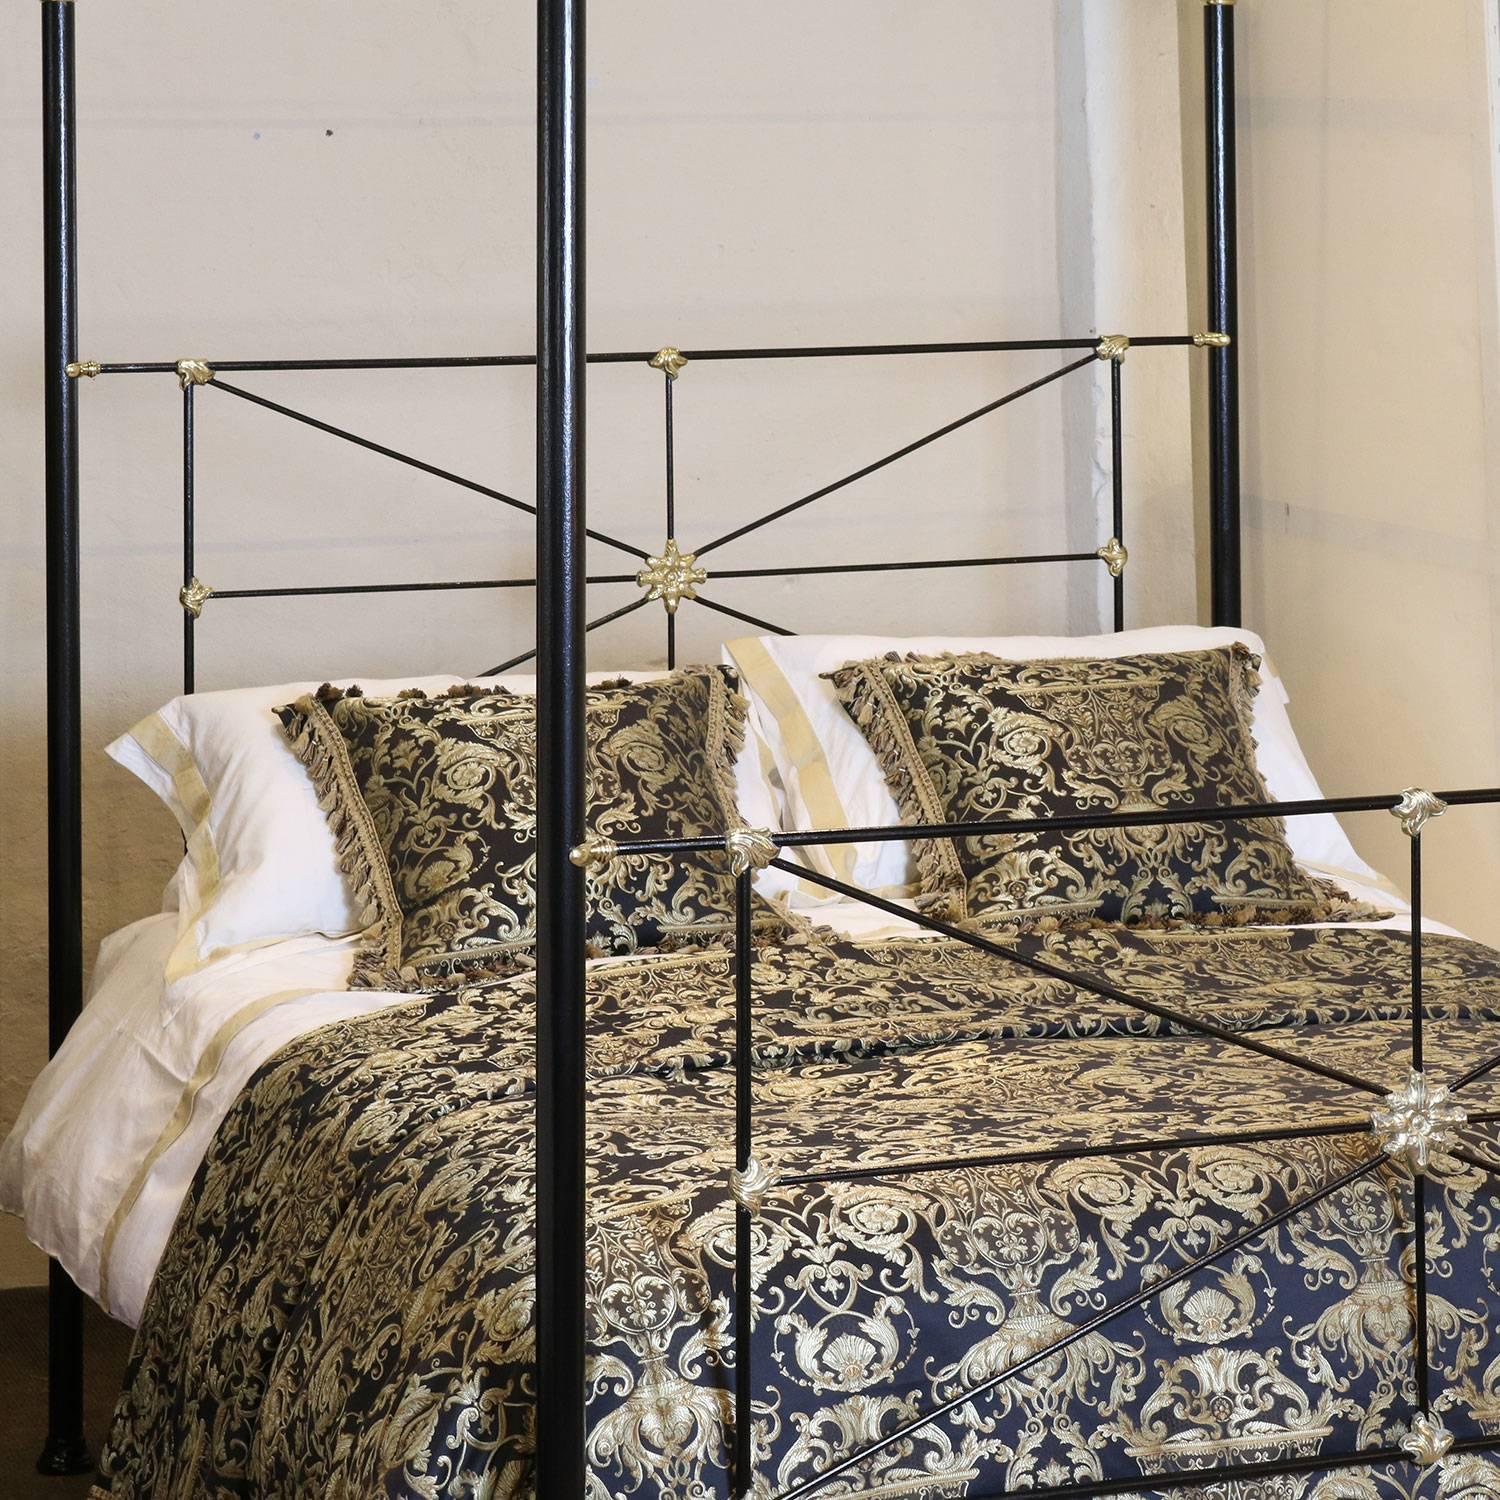 A bespoke made-to-measure four poster bedstead in the campaign style with steel framework, brass castings, brass knobs, brass collars, brass kneecaps and brass feet. The shaped canopy is a particular feature of this bed. We have made this bed